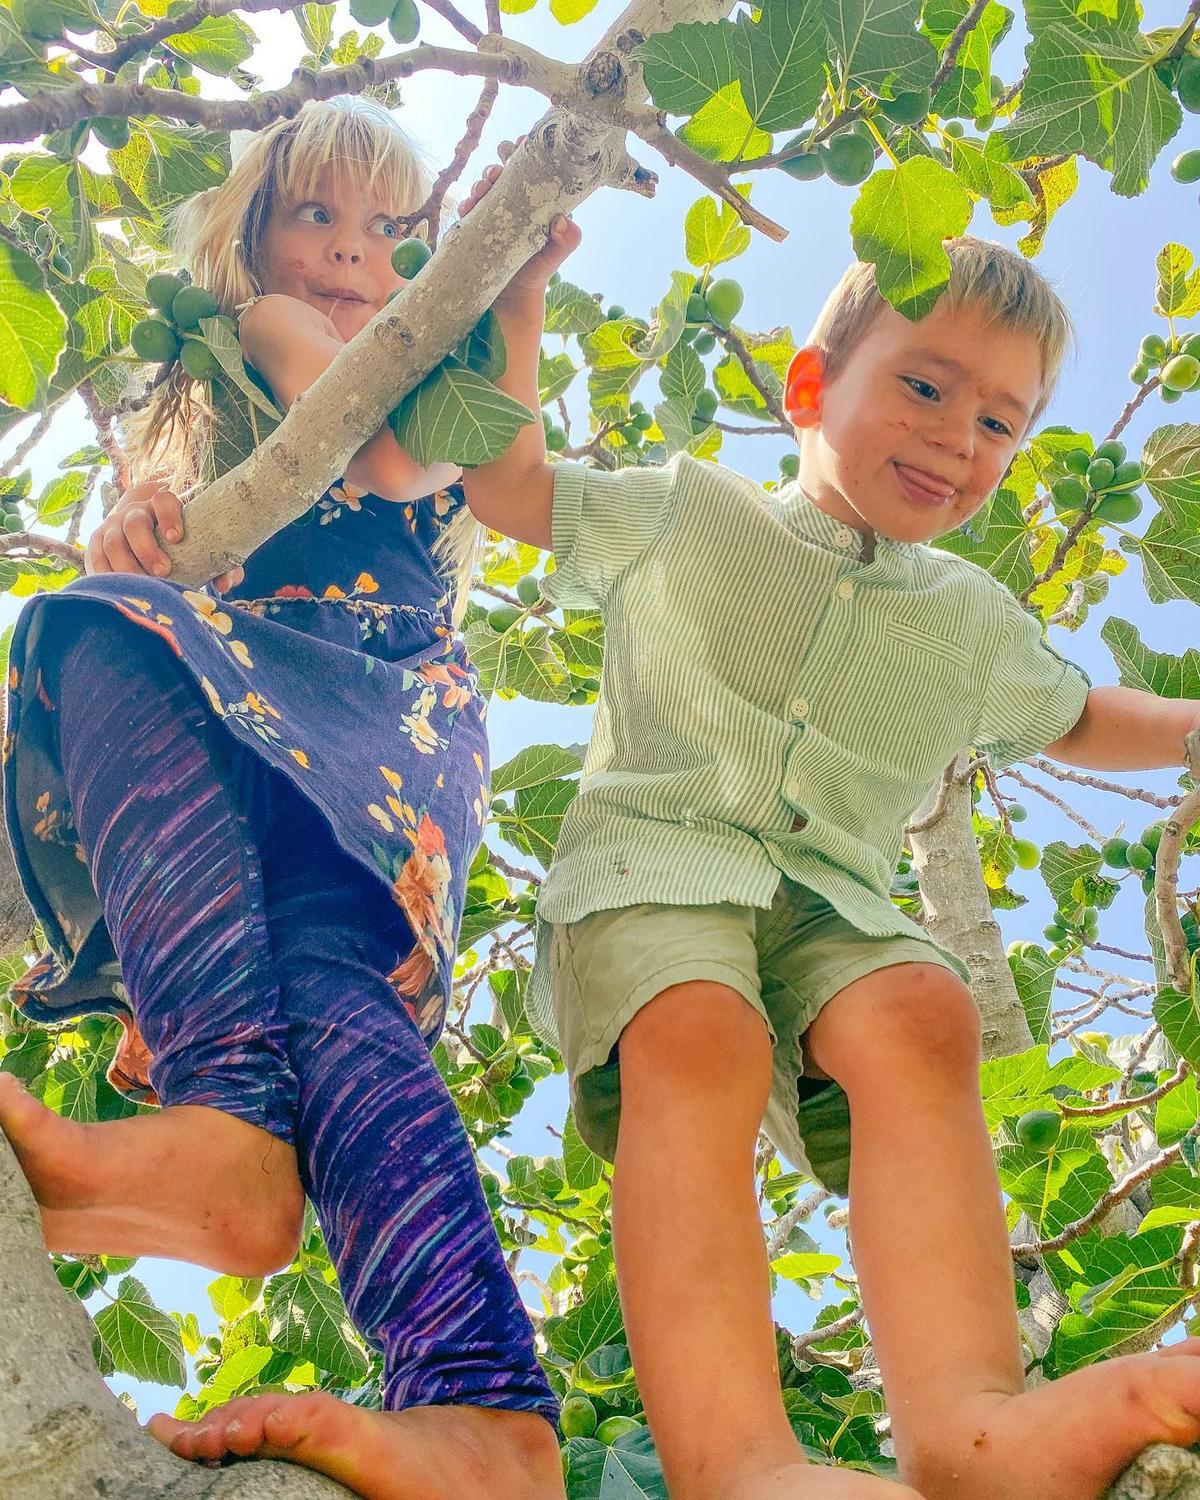 Evelyn and Christopher climbing trees in the "food forest." (Courtesy of <a href="https://www.instagram.com/mykidsaredirtyagain/">Taylor Raine</a>)